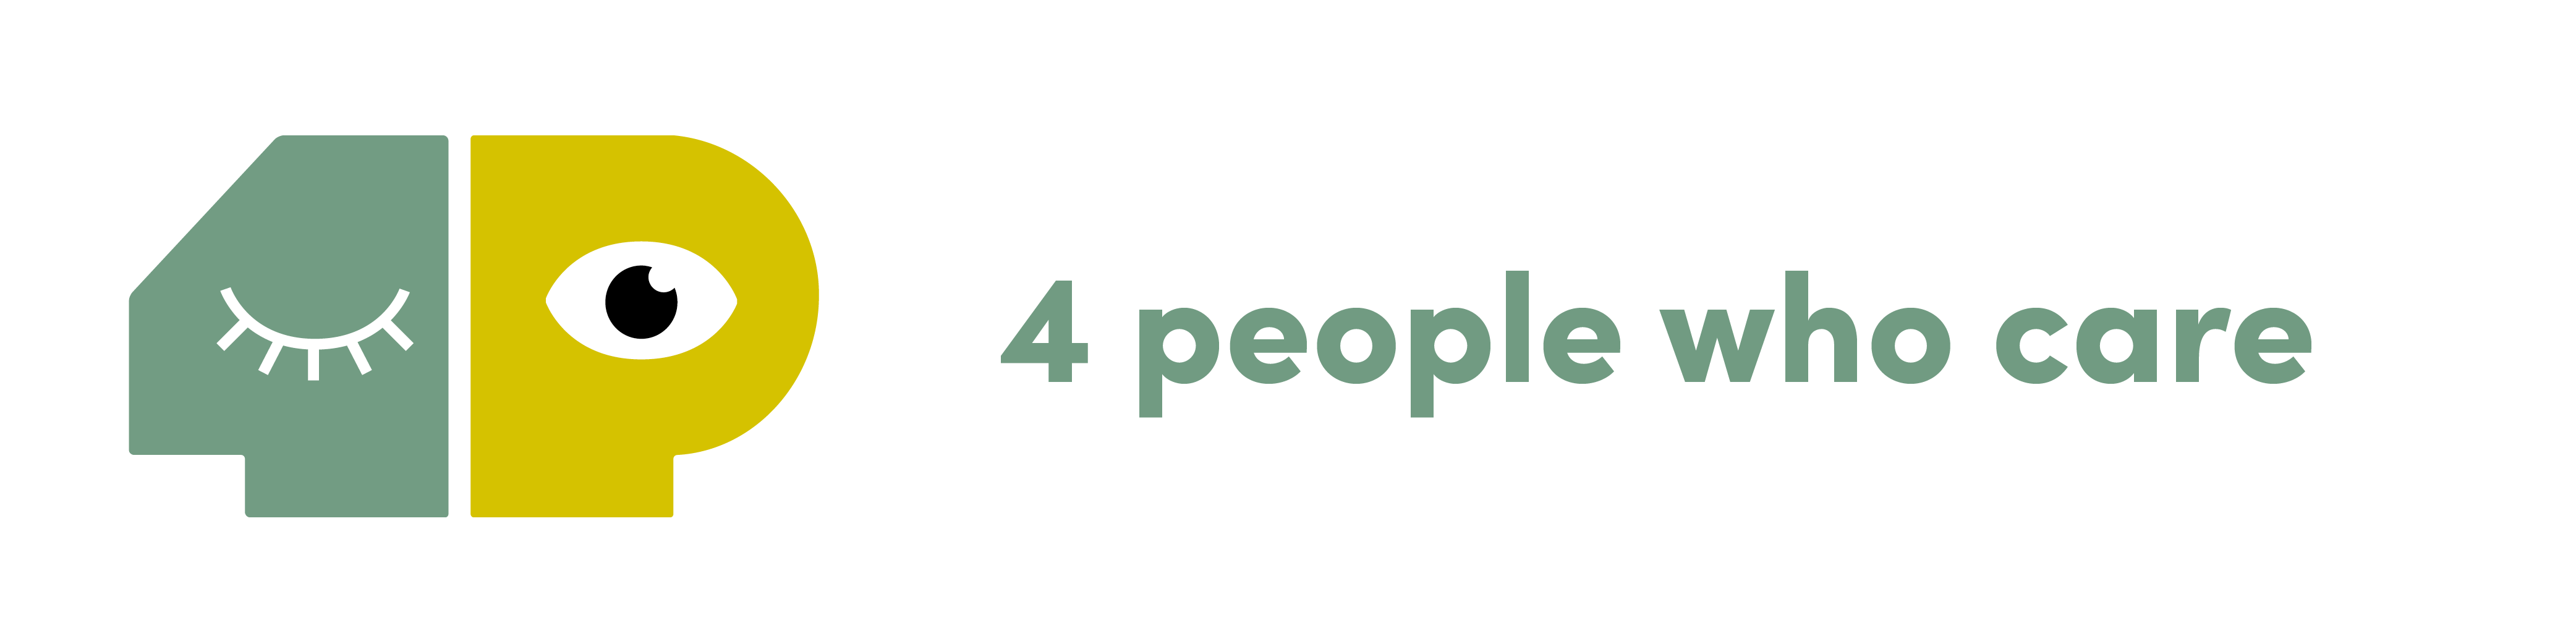 4 people who care